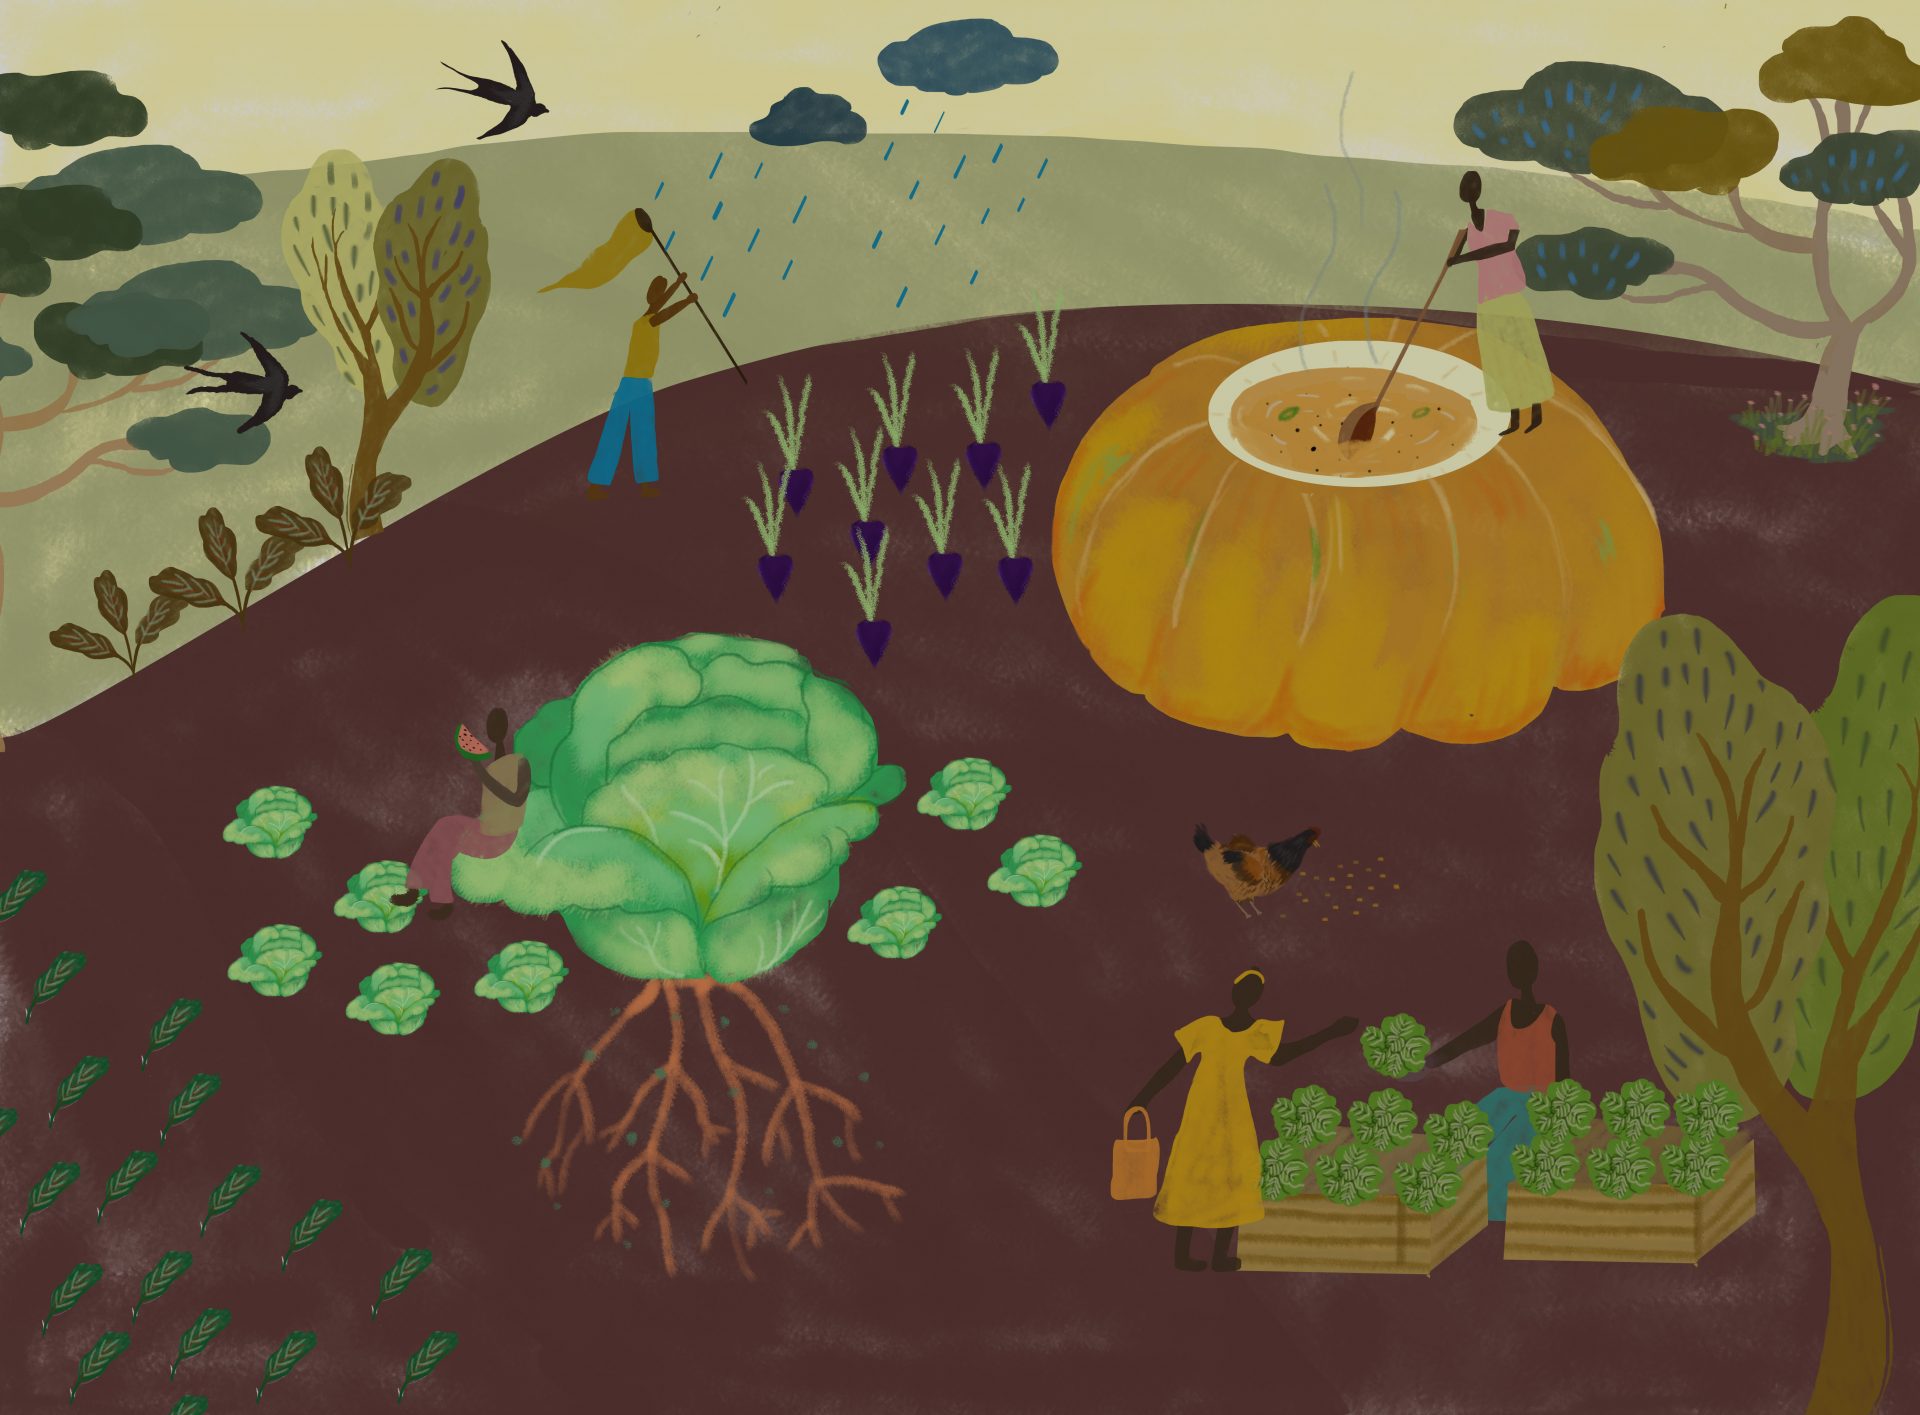 An agricultural landscape with a person sitting on a large cabbage and eating a piece of watermelon, above a person catching raindrops in a net, and on the right, a person standing on a big pumpkin and cooking soup inside it, on the bottom right two people exchanging vegetables in return for money.